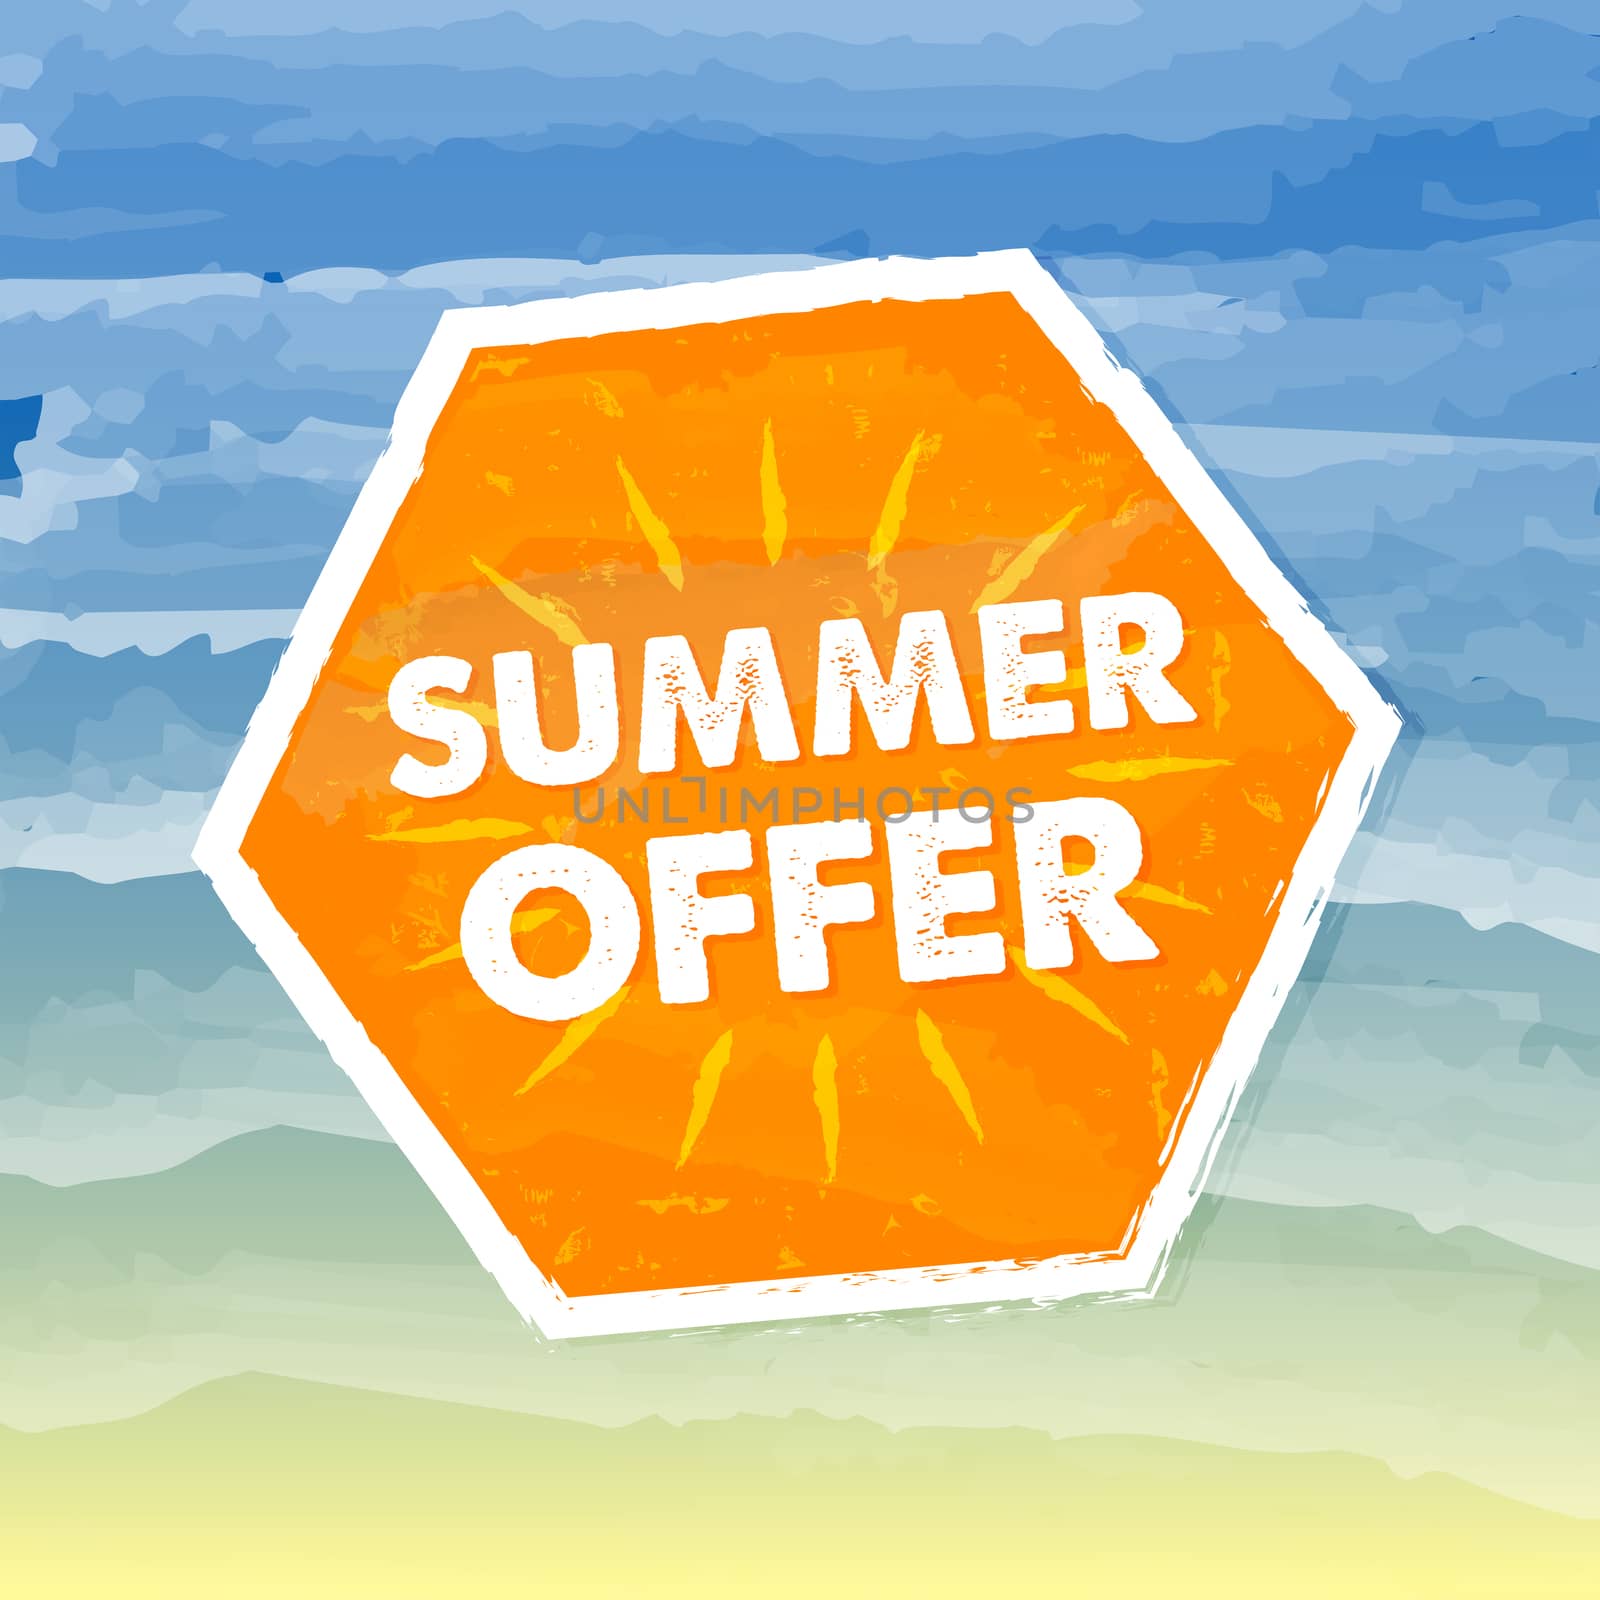 summer offer banner - text in orange hexagon label over yellow blue drawn background, business seasonal shopping concept